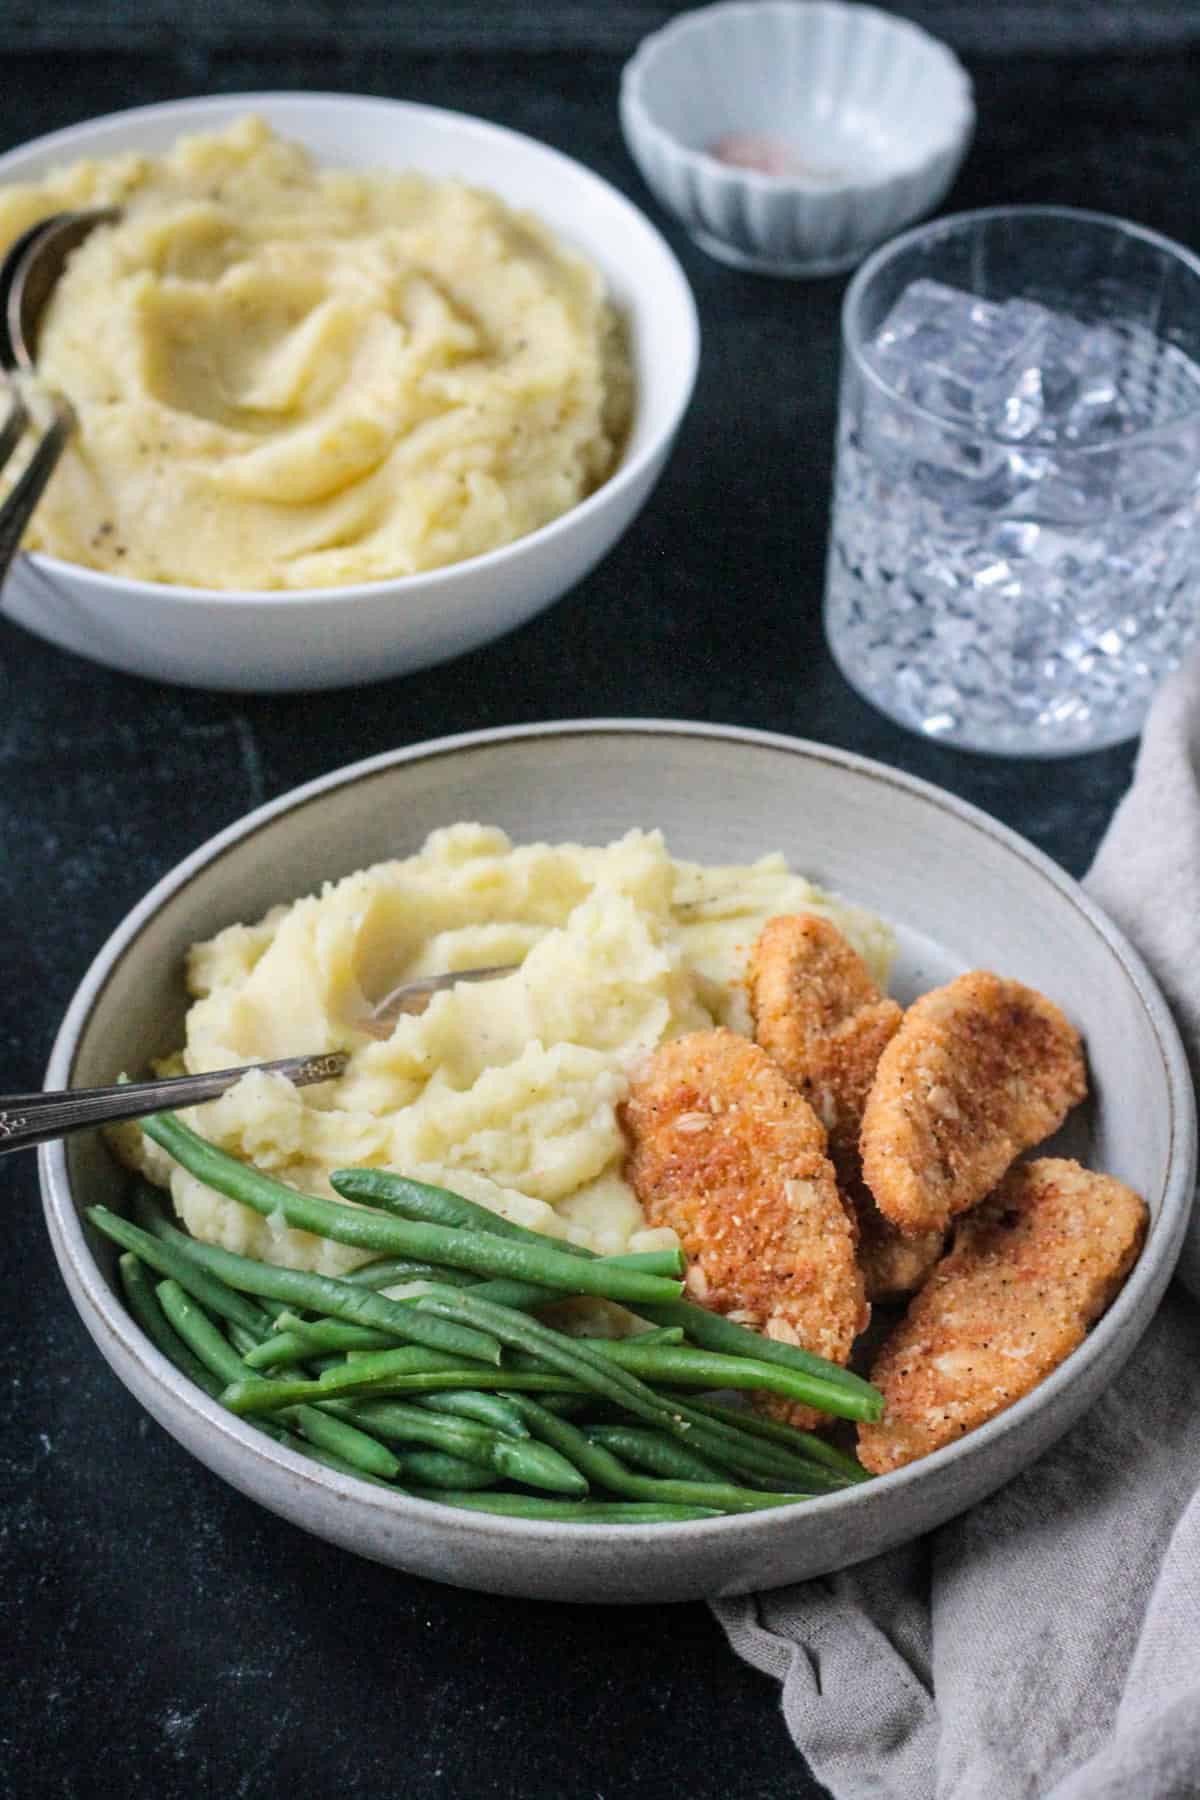 Plate of chicken tenders, green beans, and mashed potatoes.